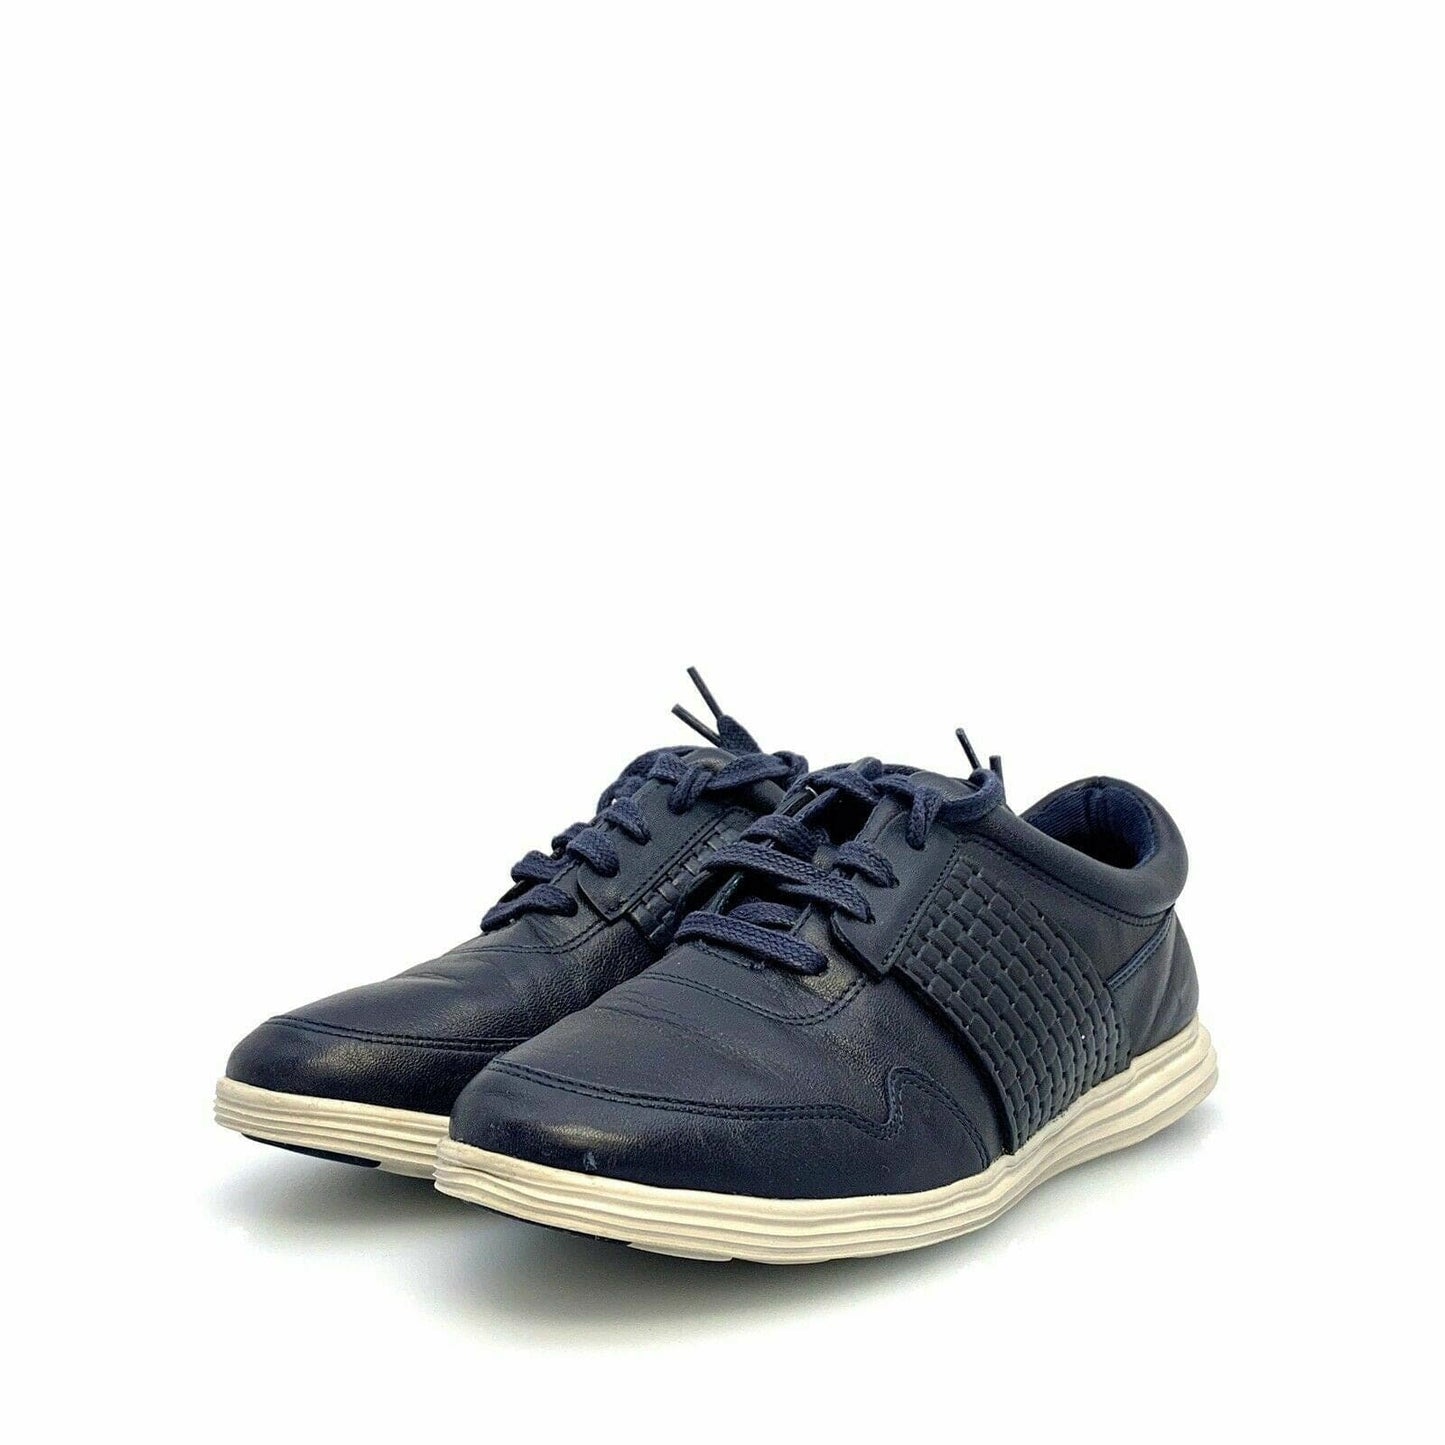 Glamorous Cole Haan Womens Zero Grand.OS Lace Up Sneakers Leather Shoes - Size 5B, Dark Blue